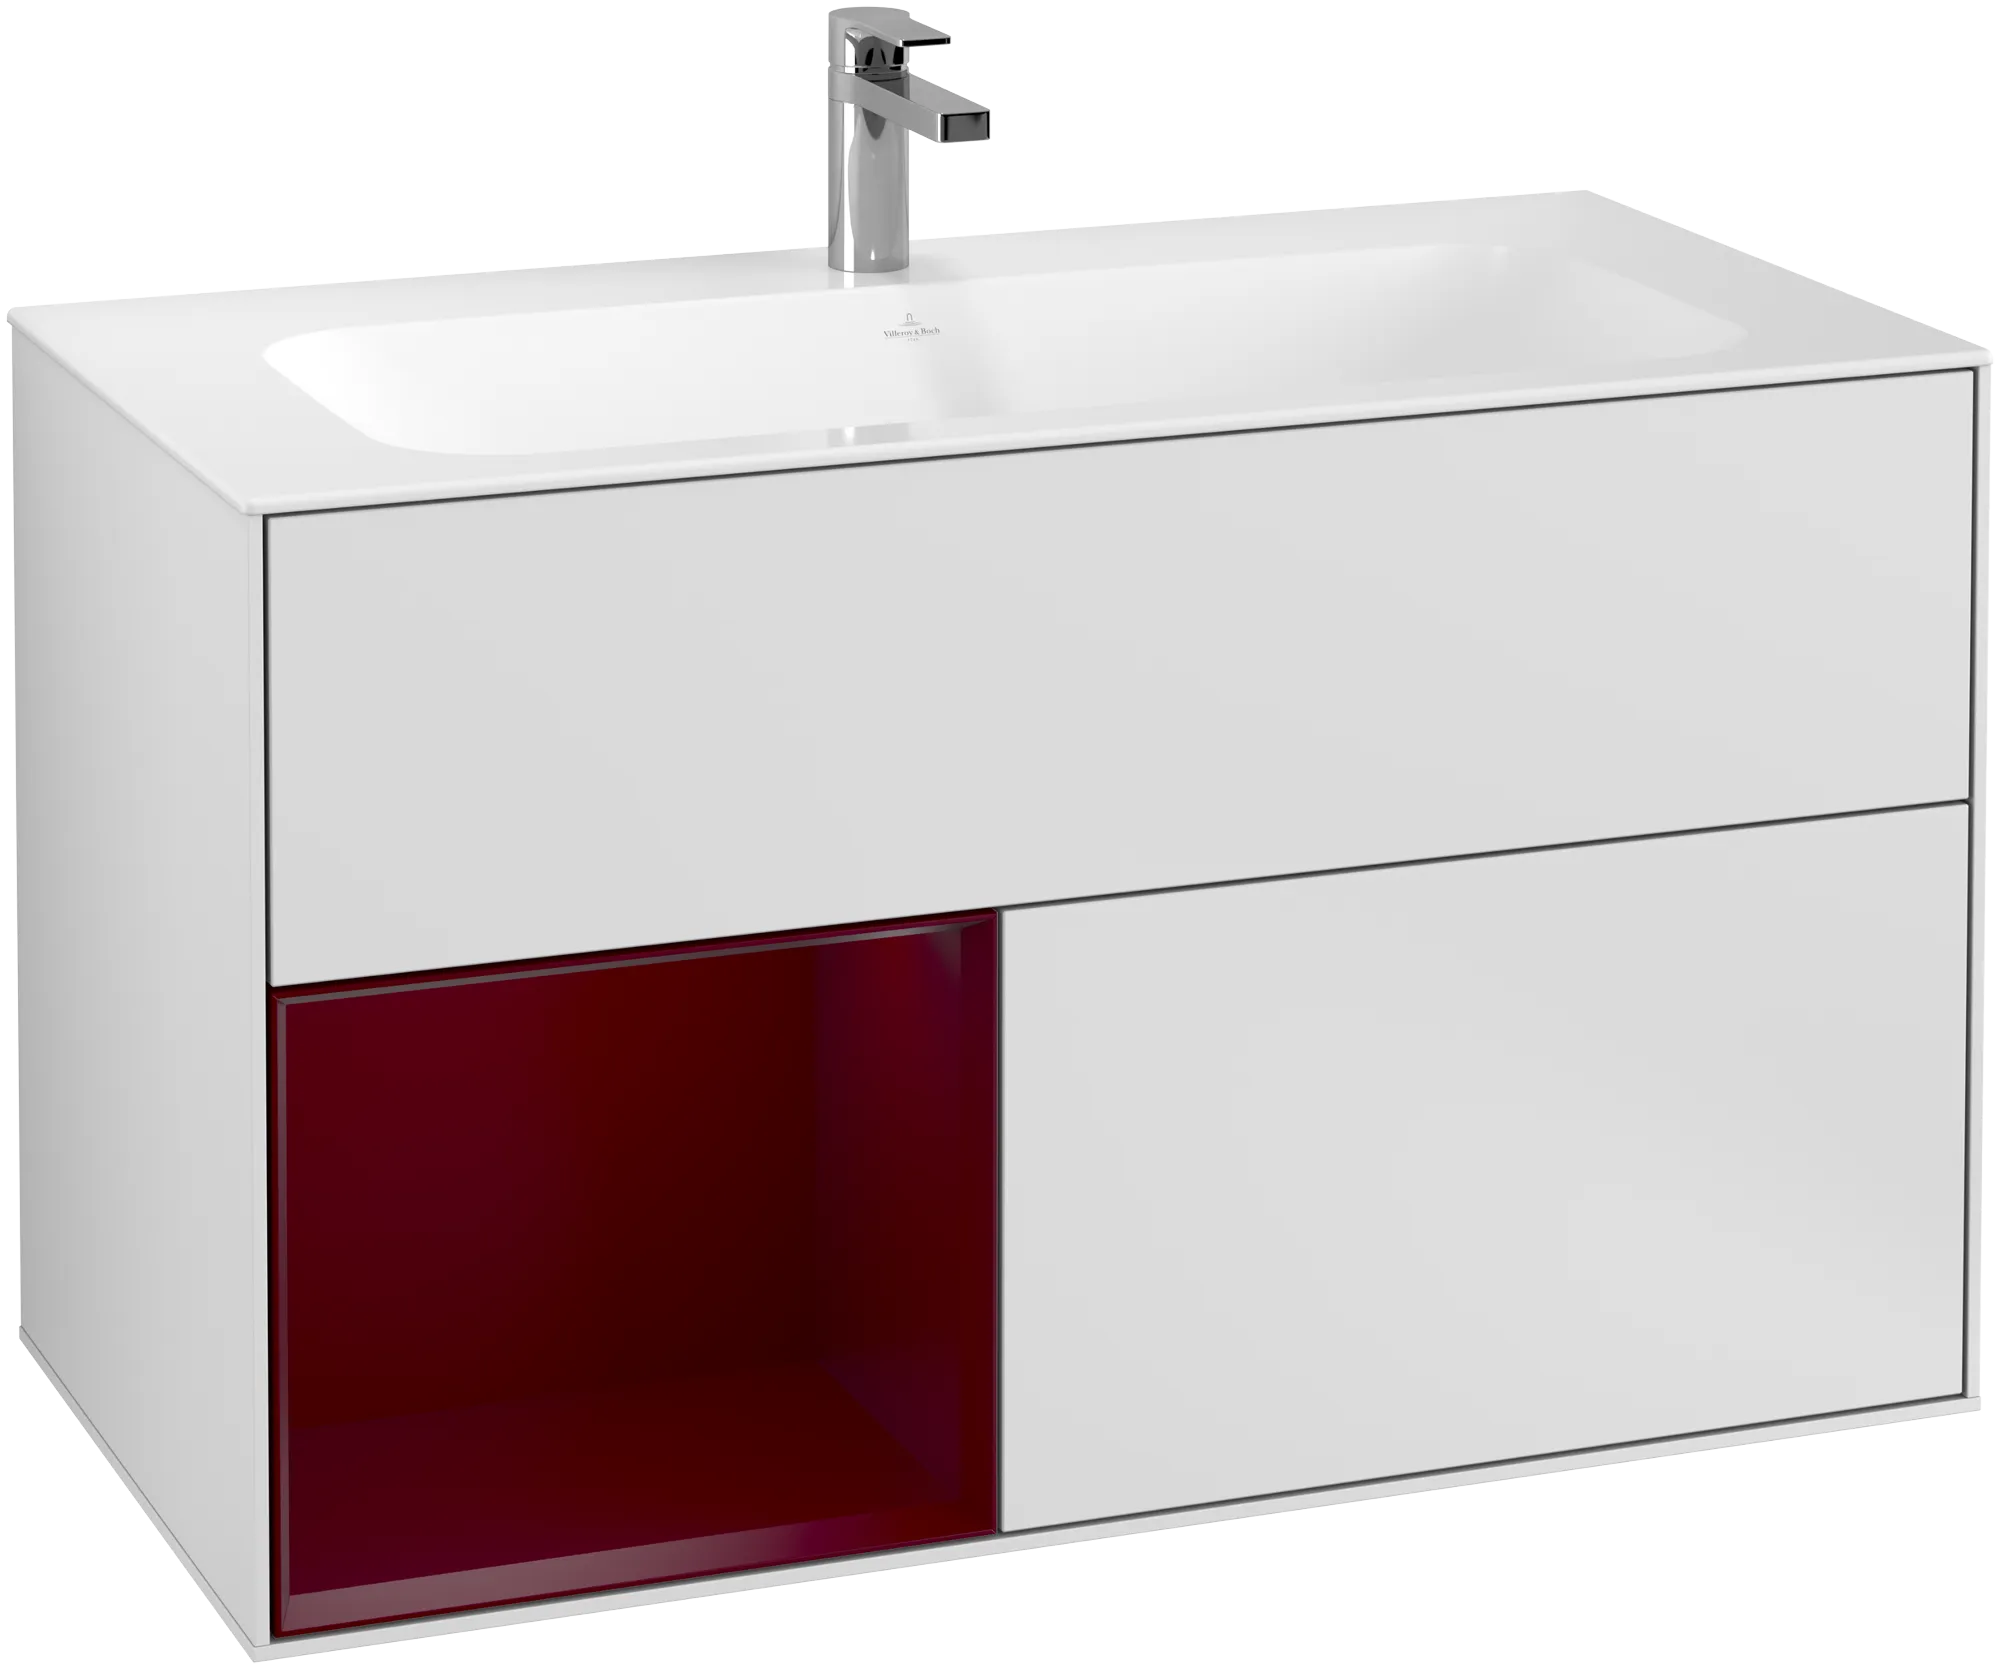 Picture of VILLEROY BOCH Finion Vanity unit, with lighting, 2 pull-out compartments, 996 x 591 x 498 mm, White Matt Lacquer / Peony Matt Lacquer #G030HBMT